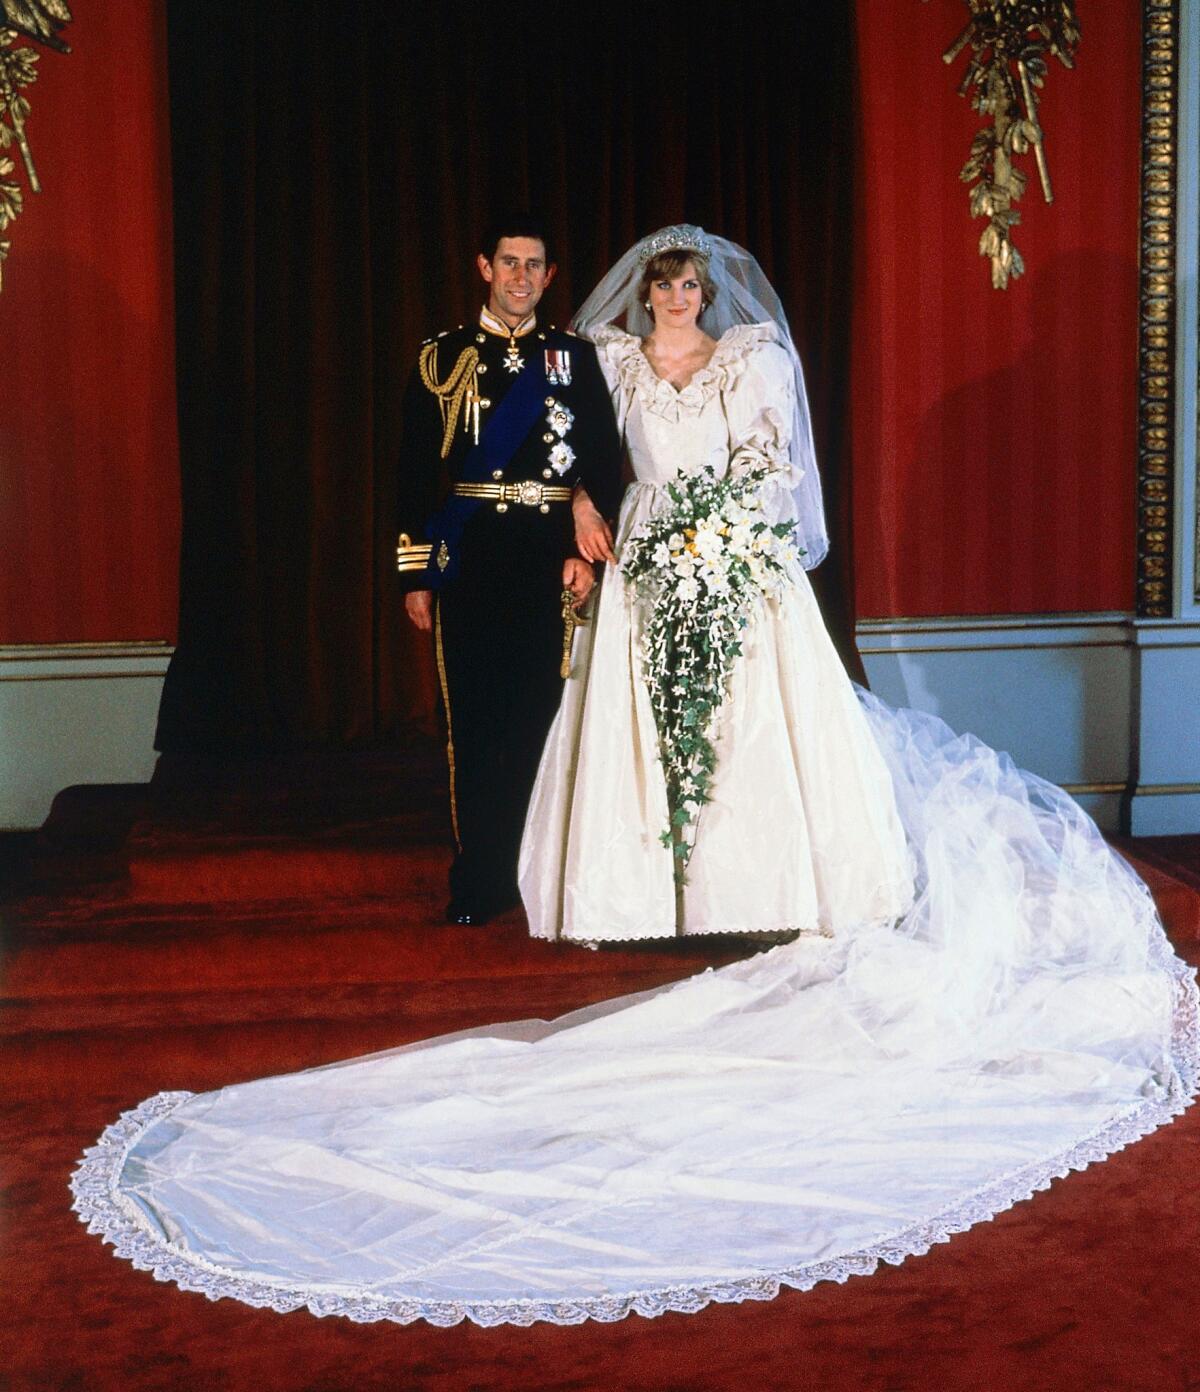 The formal wedding portrait of Prince Charles and Diana, Princess of Wales, taken at Buckingham Palace on July 29, 1981, after their marriage at St. Paul's Cathedral, London.